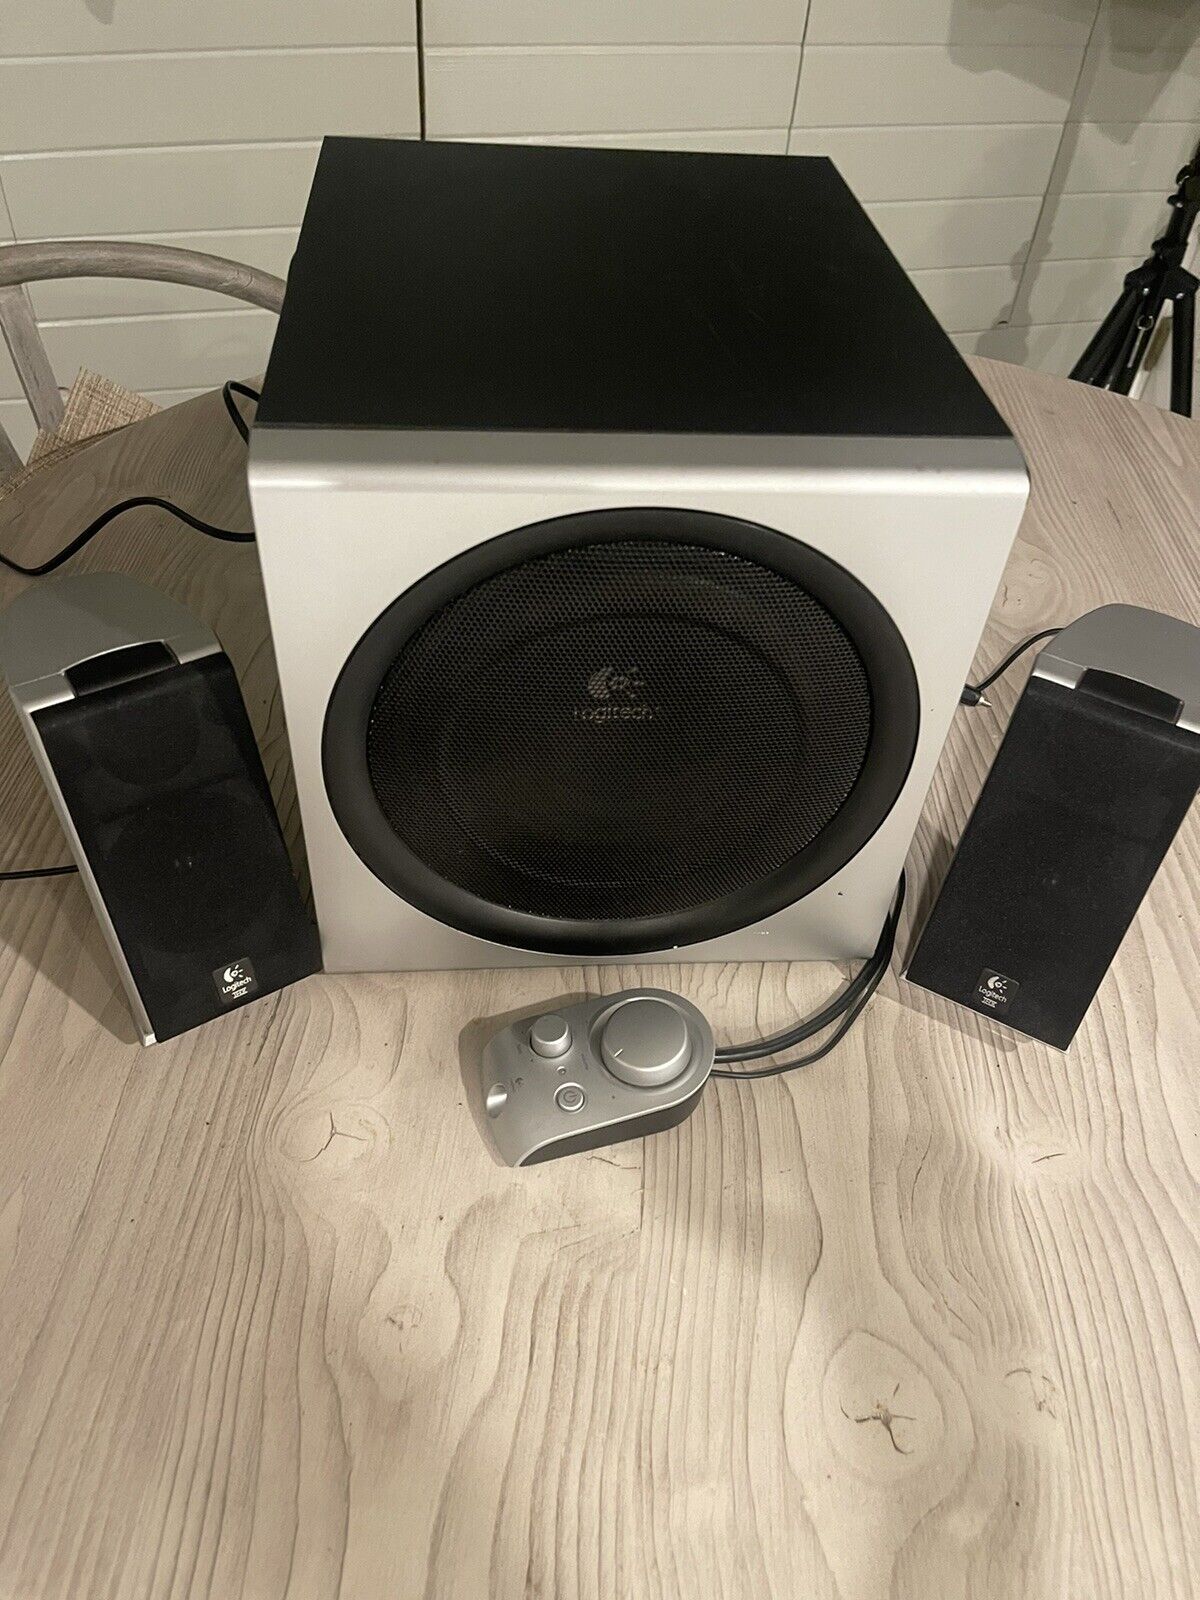 Logitech Z-2300 Computer Speakers With Box